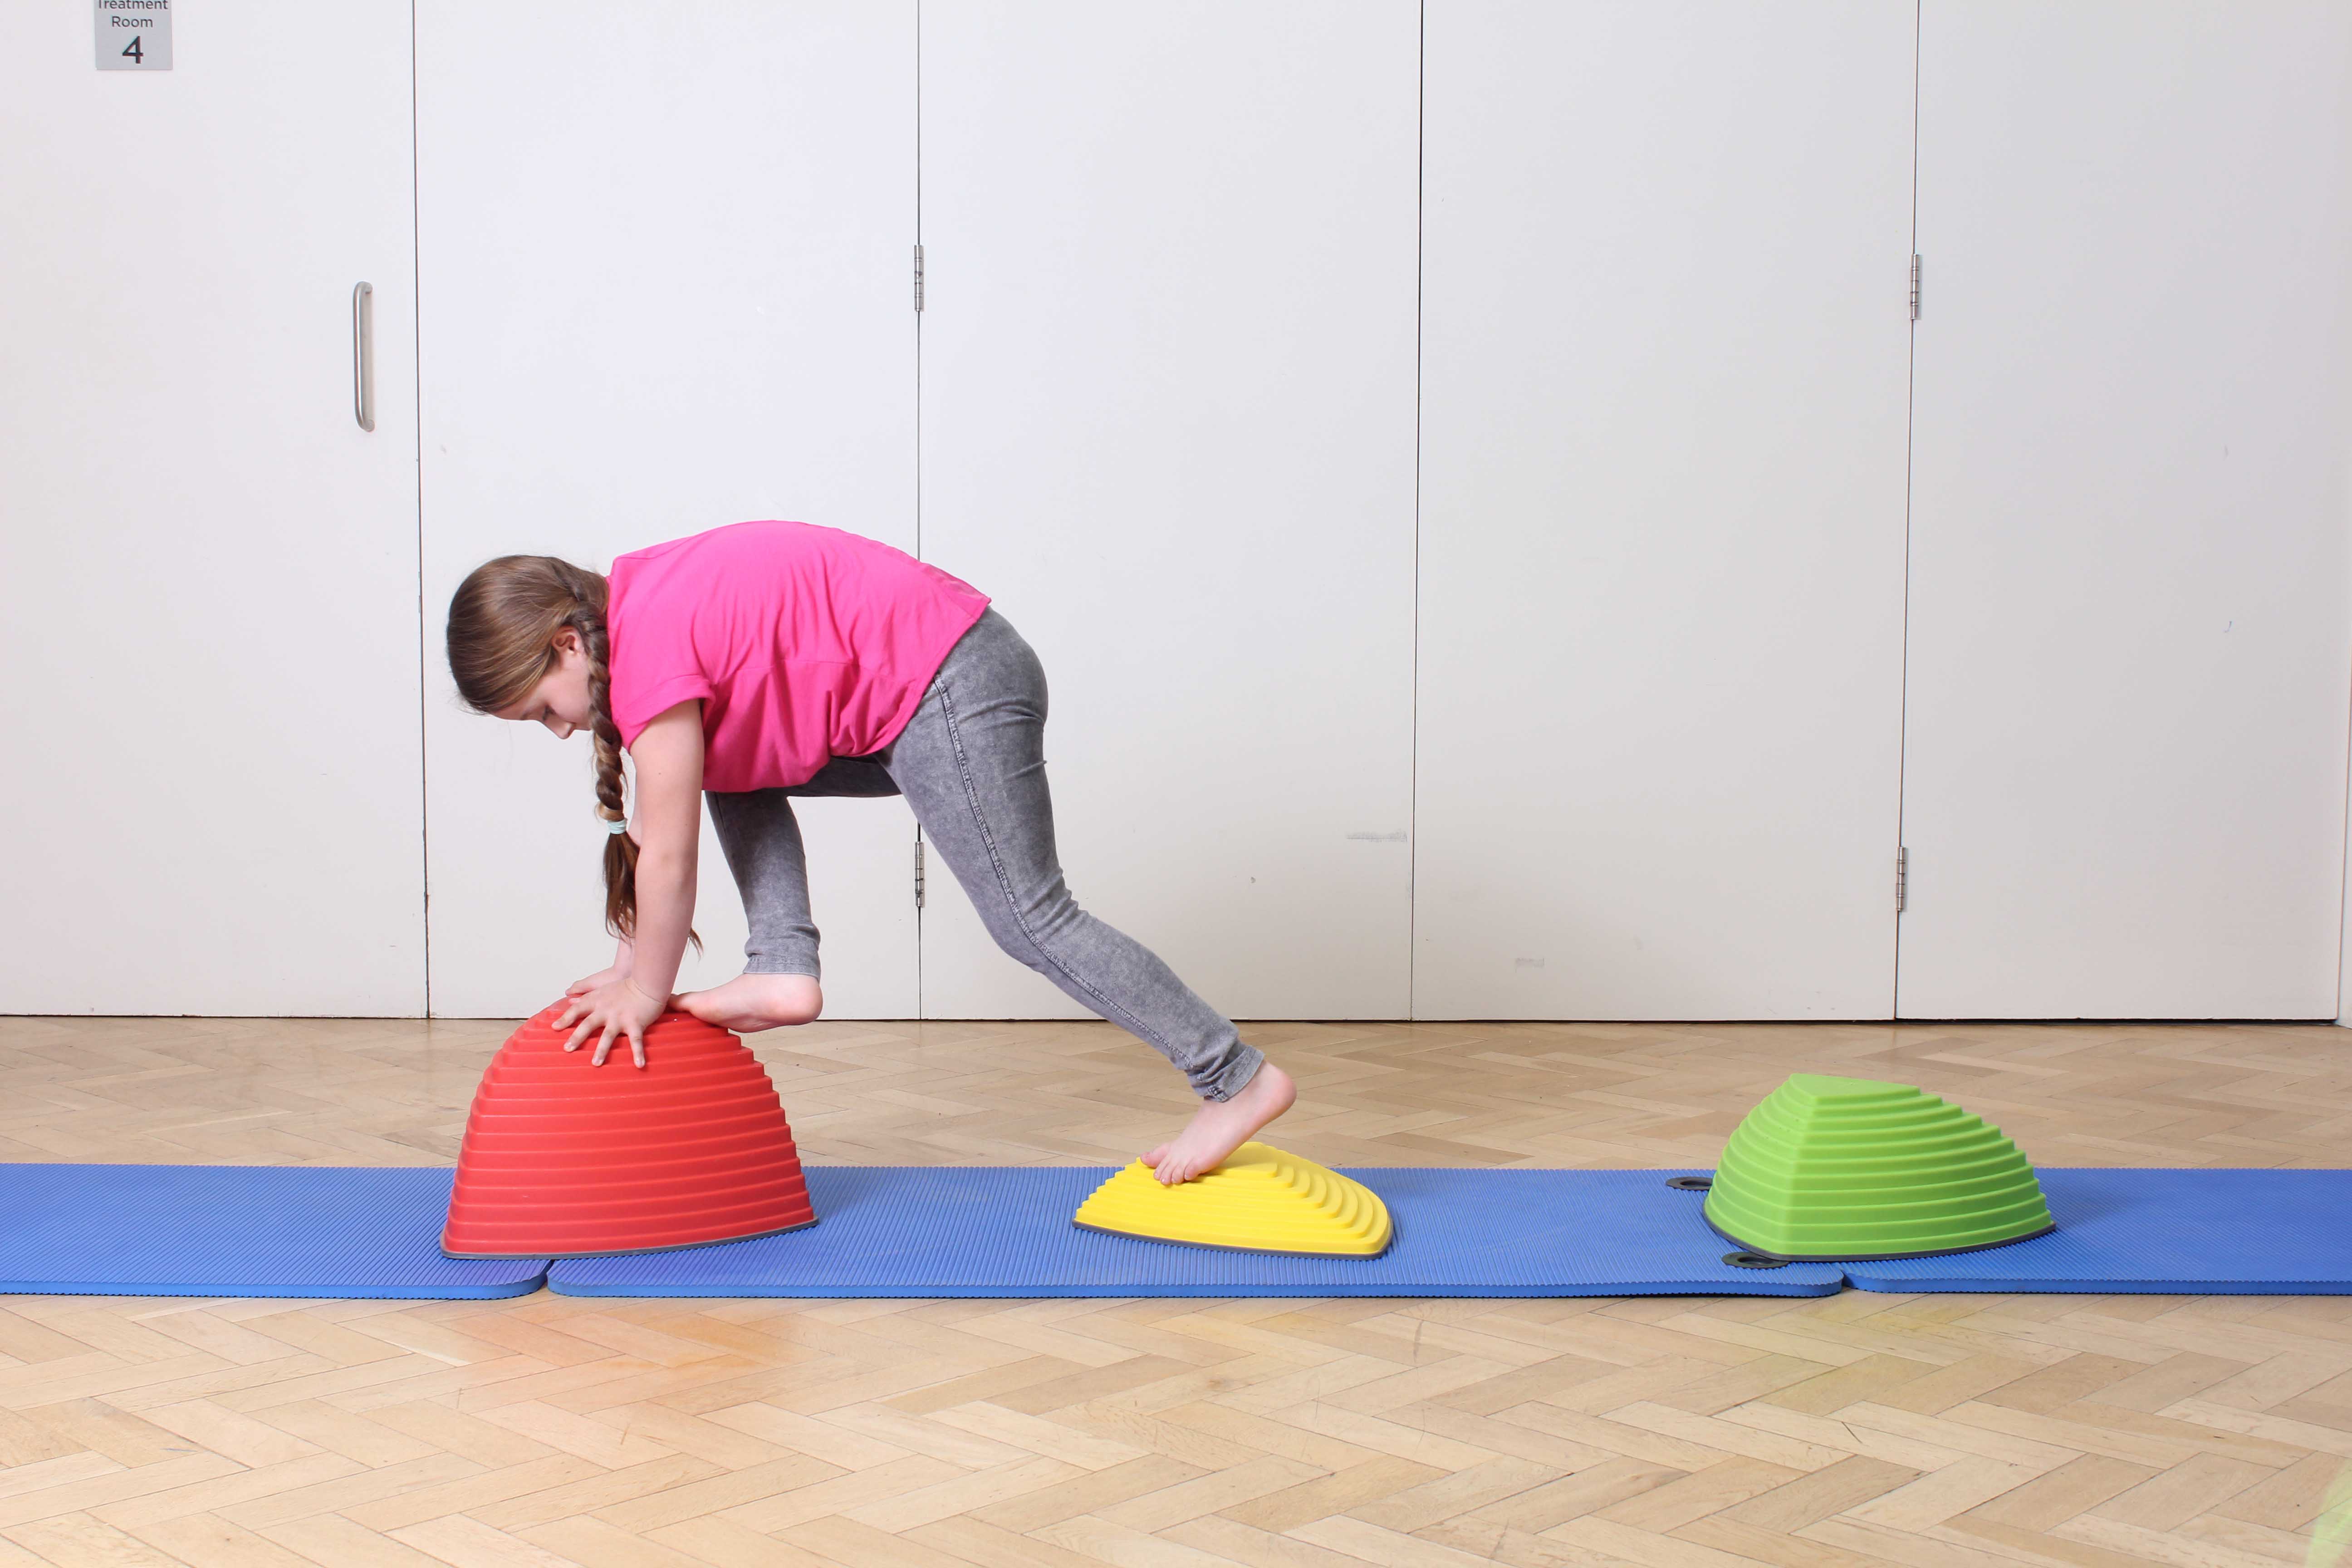 Toning and strengthening exercises assisted by specilaist paediatric physiotherapist